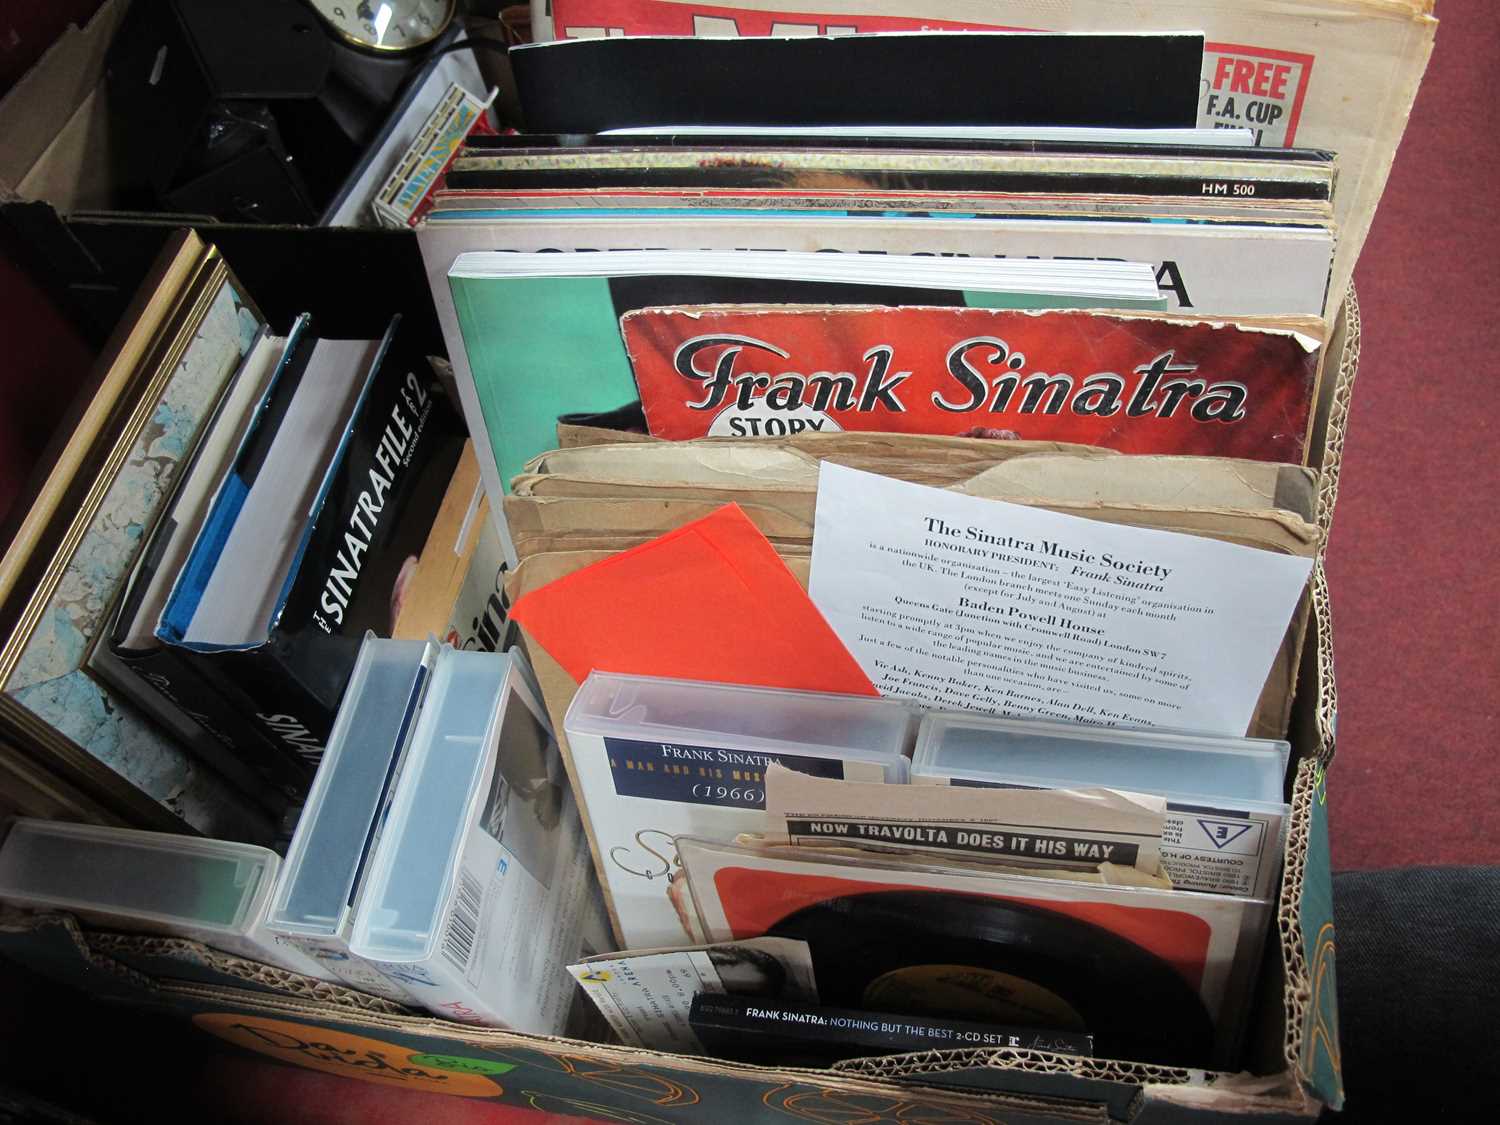 Frank Sinatra - records, vhs videos, various publications, postcard, etc:- One Box. - Image 2 of 2